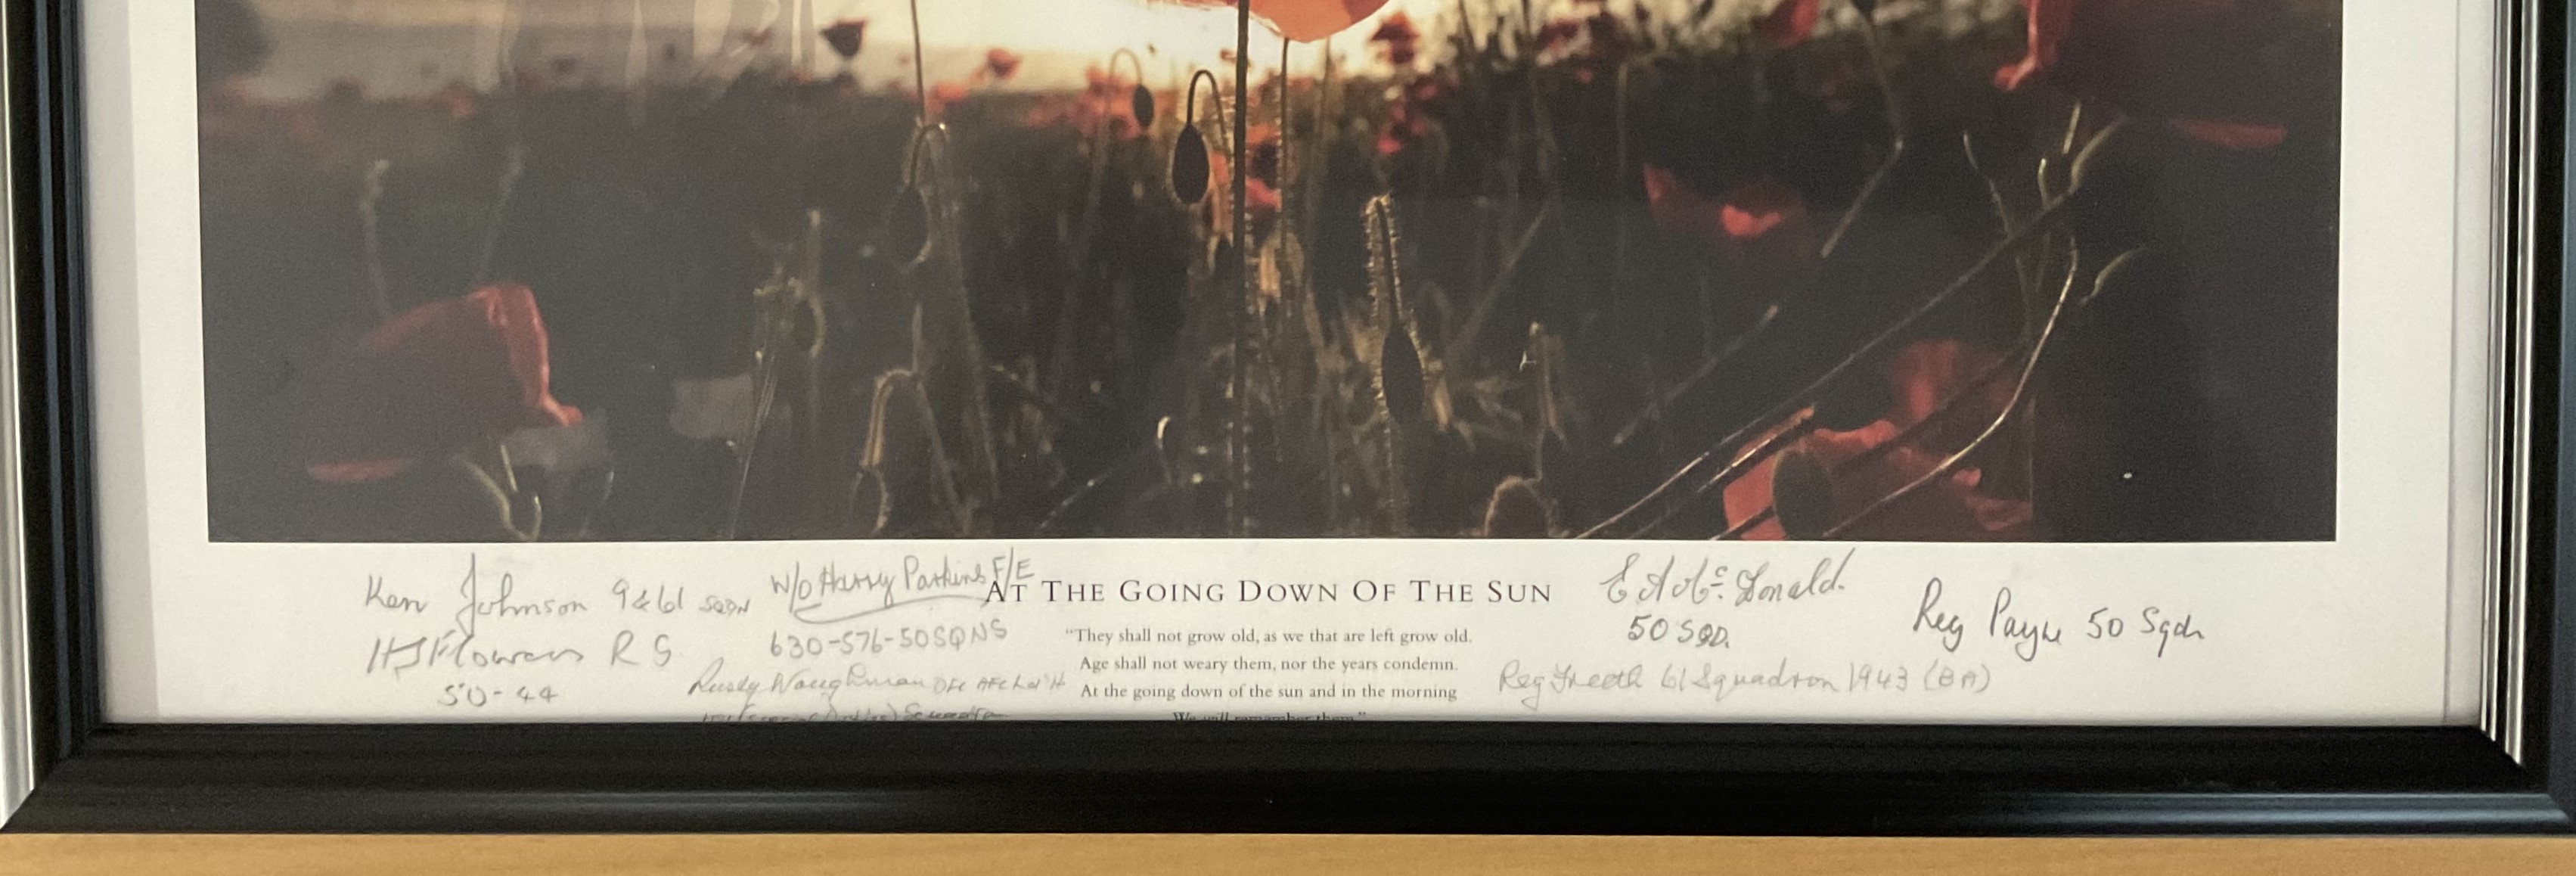 At the Going Down of the Sun, signed by 7 including H J Flowers, Harry Parkins, Ken Johnson, Rusty - Image 2 of 2